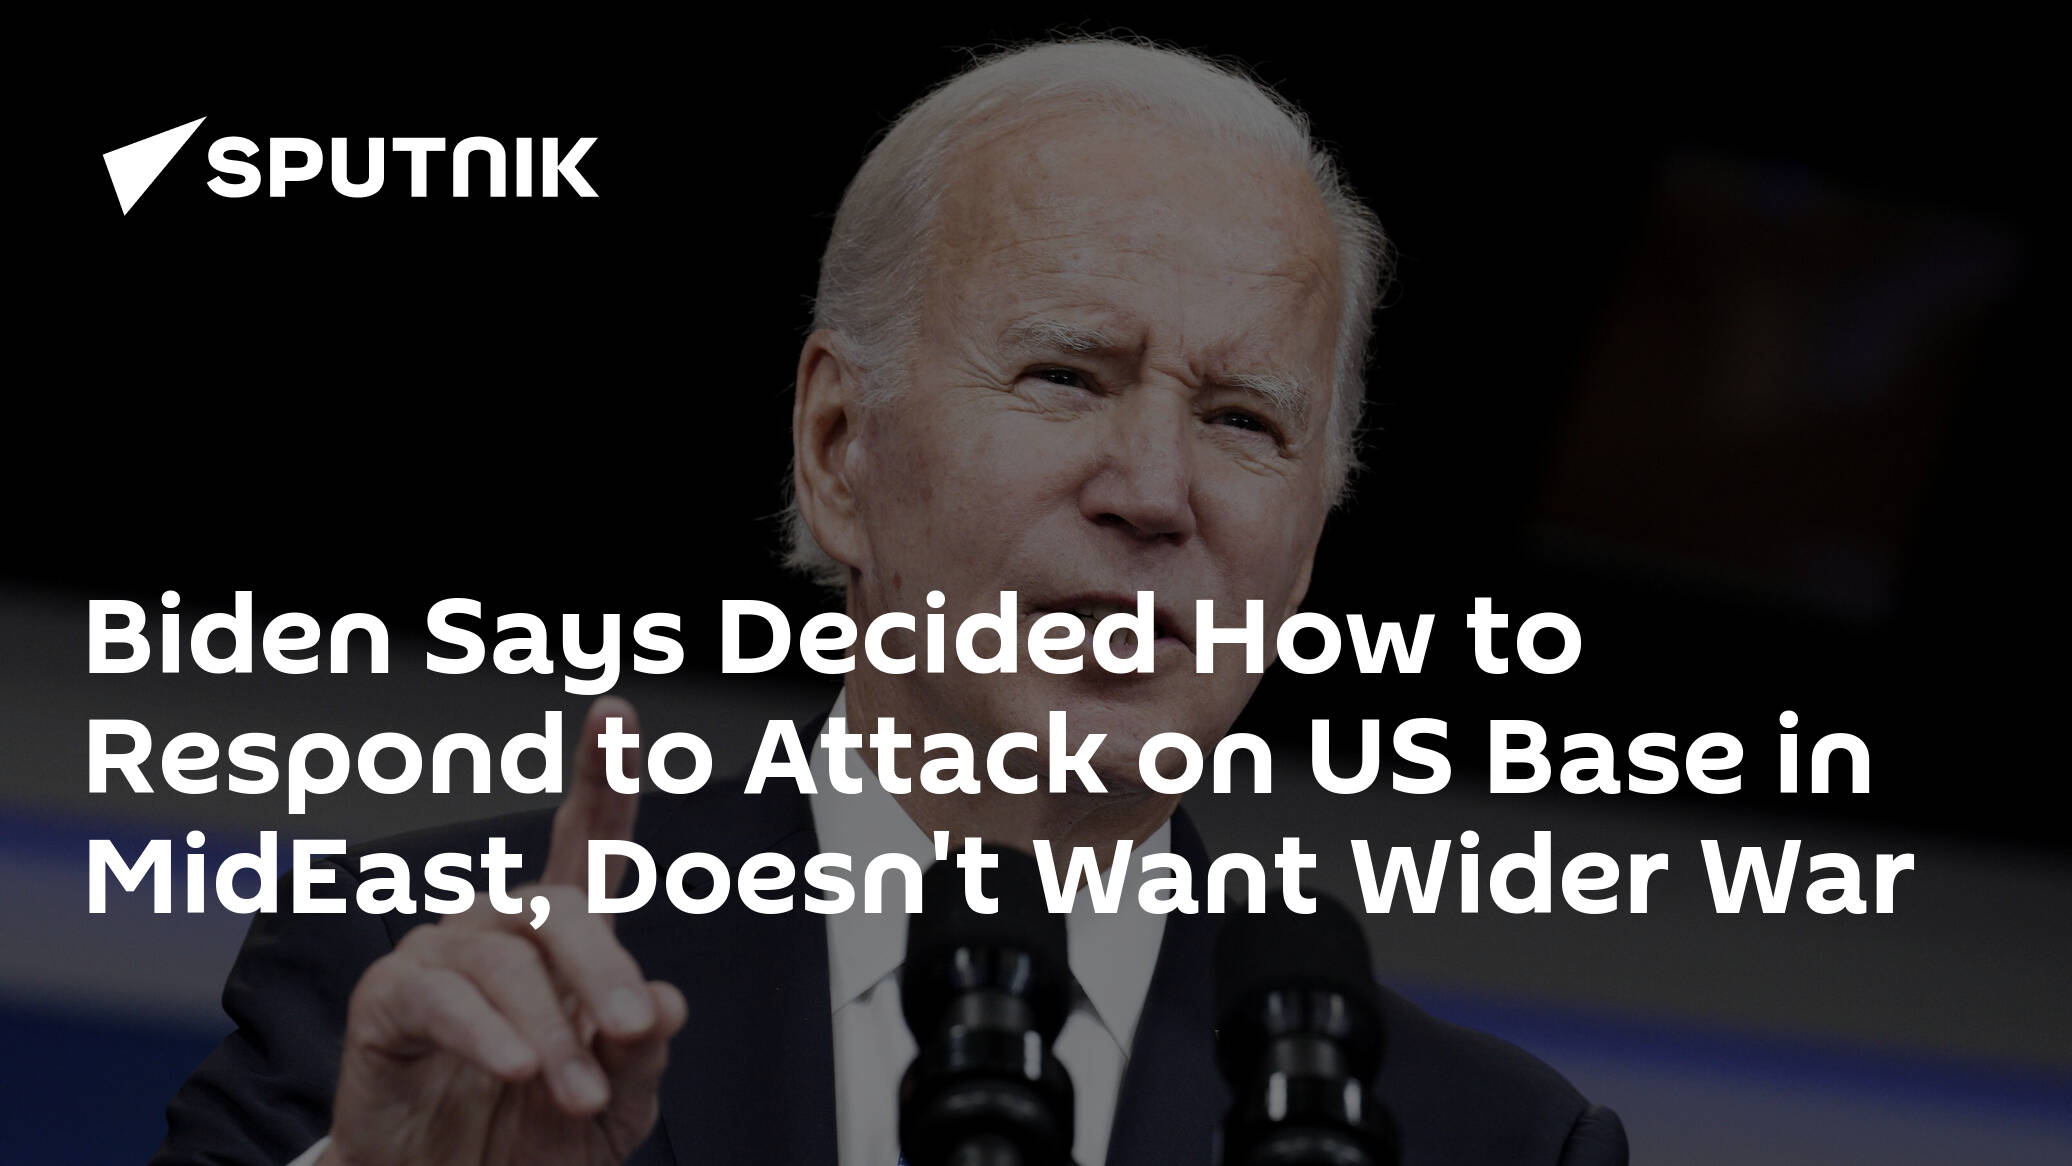 Biden Says Decided How to Respond to Attack on US Base in MidEast, Doesn't Want Wider War